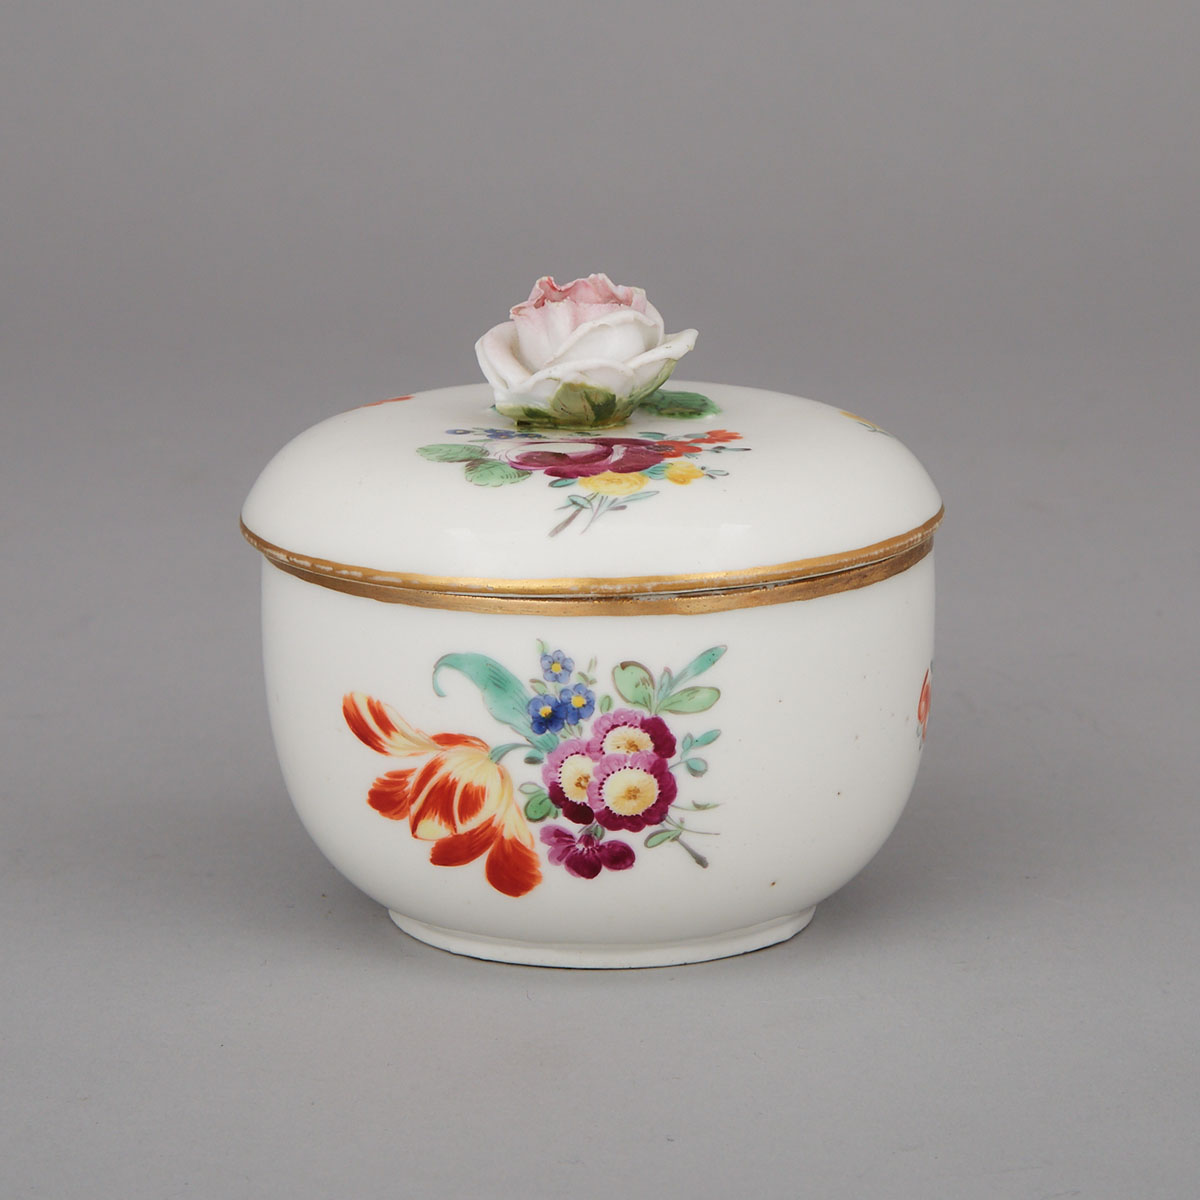 Continental Porcelain Covered Sugar Bowl, probably German, 19th century